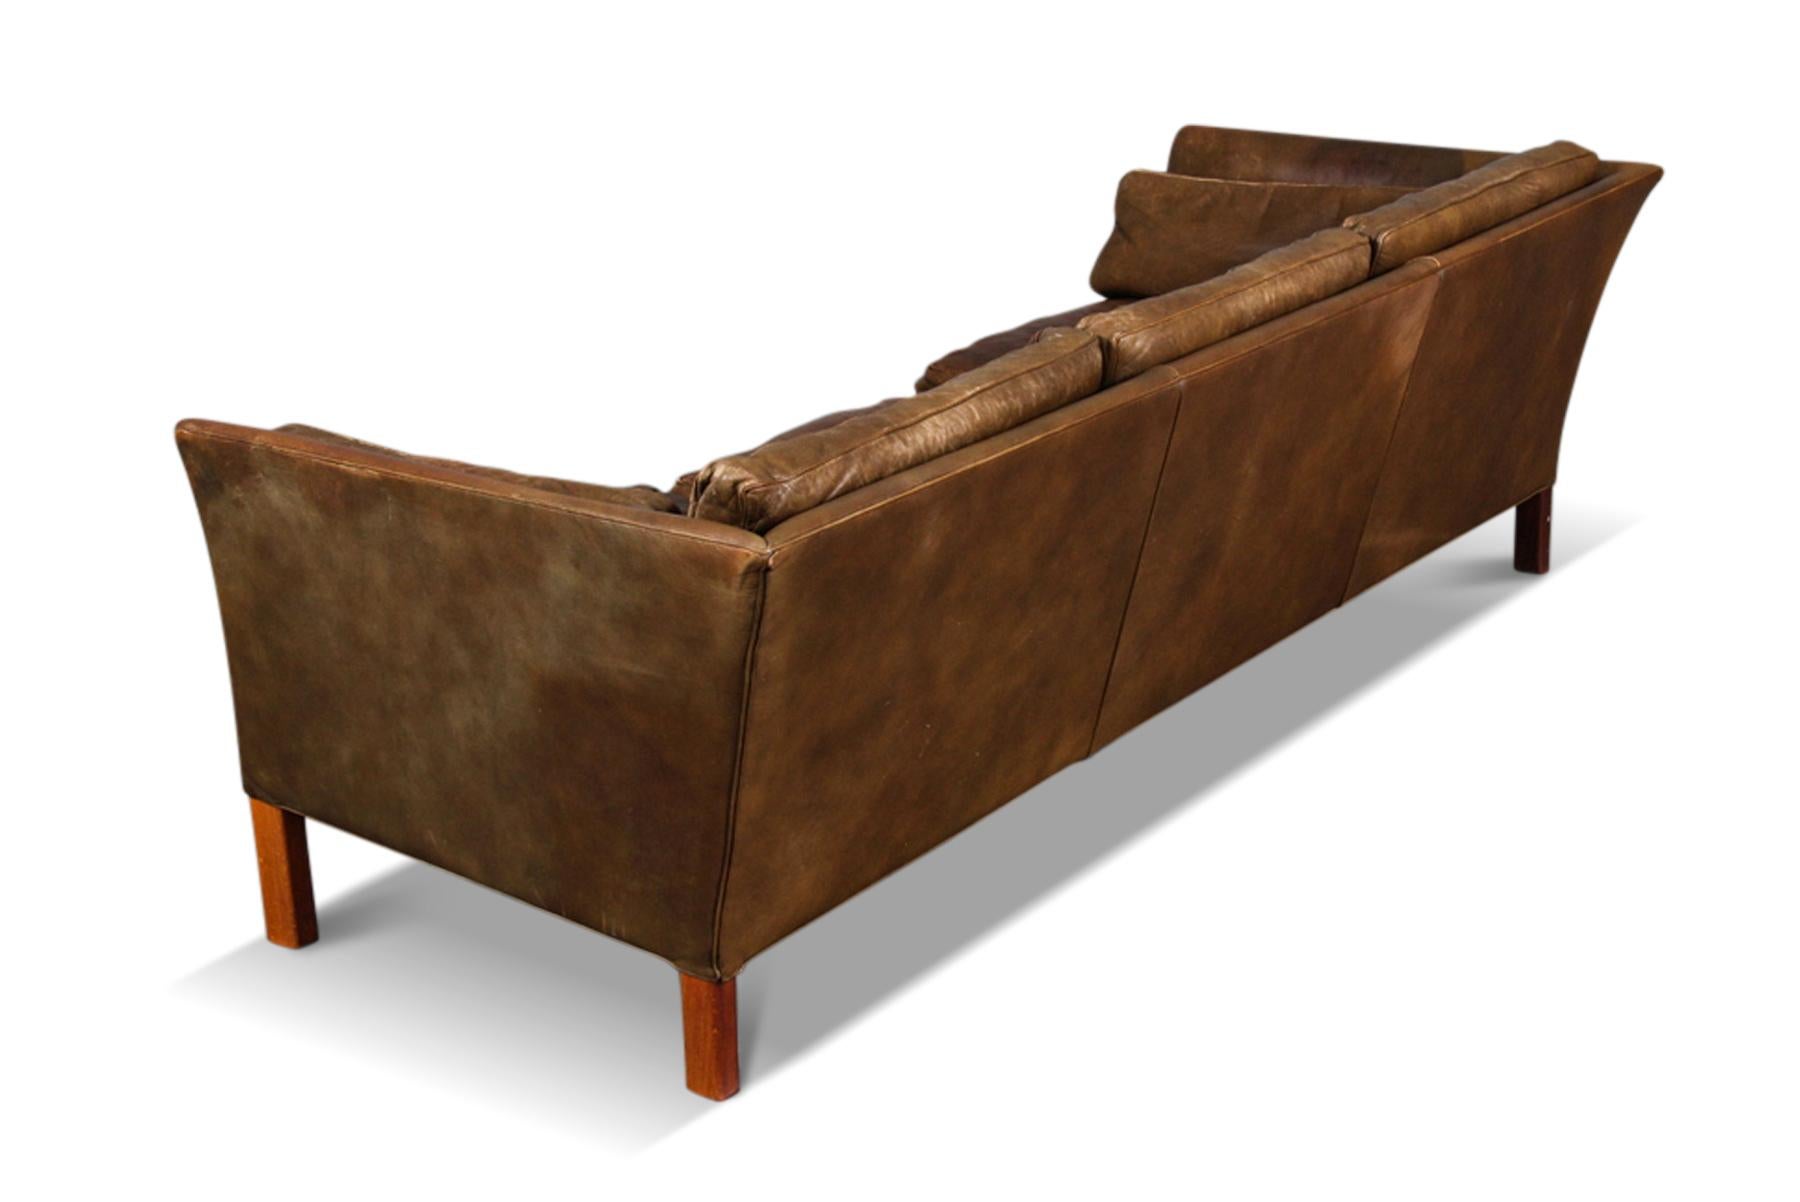 Other “Cromwell” Sofa in Dark Green Patinated Leather by Arne Norell